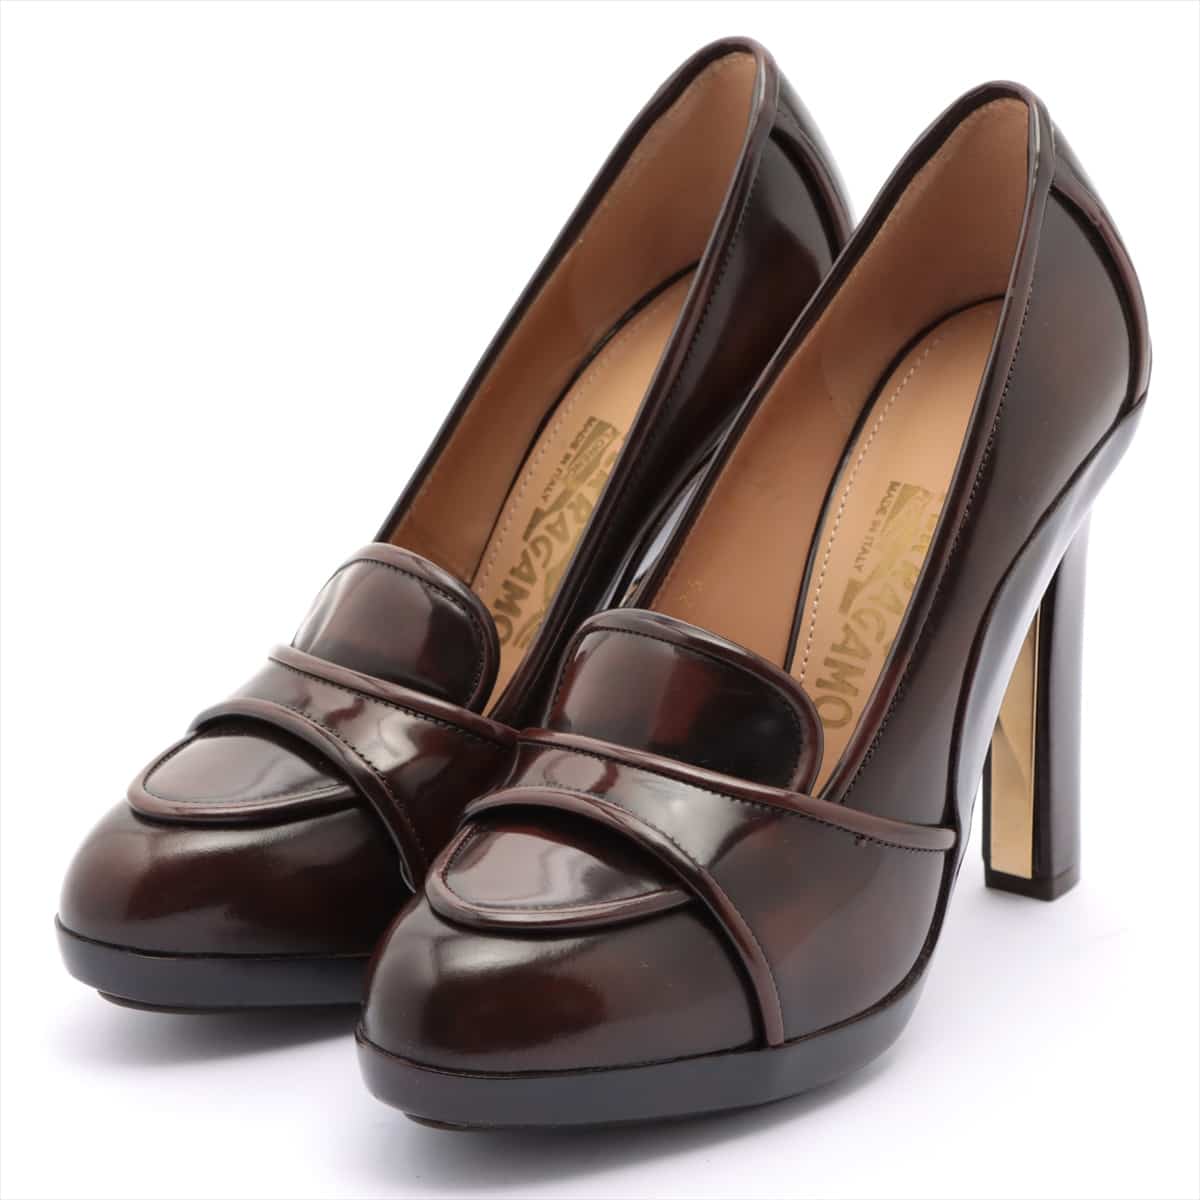 Ferragamo Patent leather Pumps 6.5 Ladies' Brown The metal fitting on the left heel is about to come off.